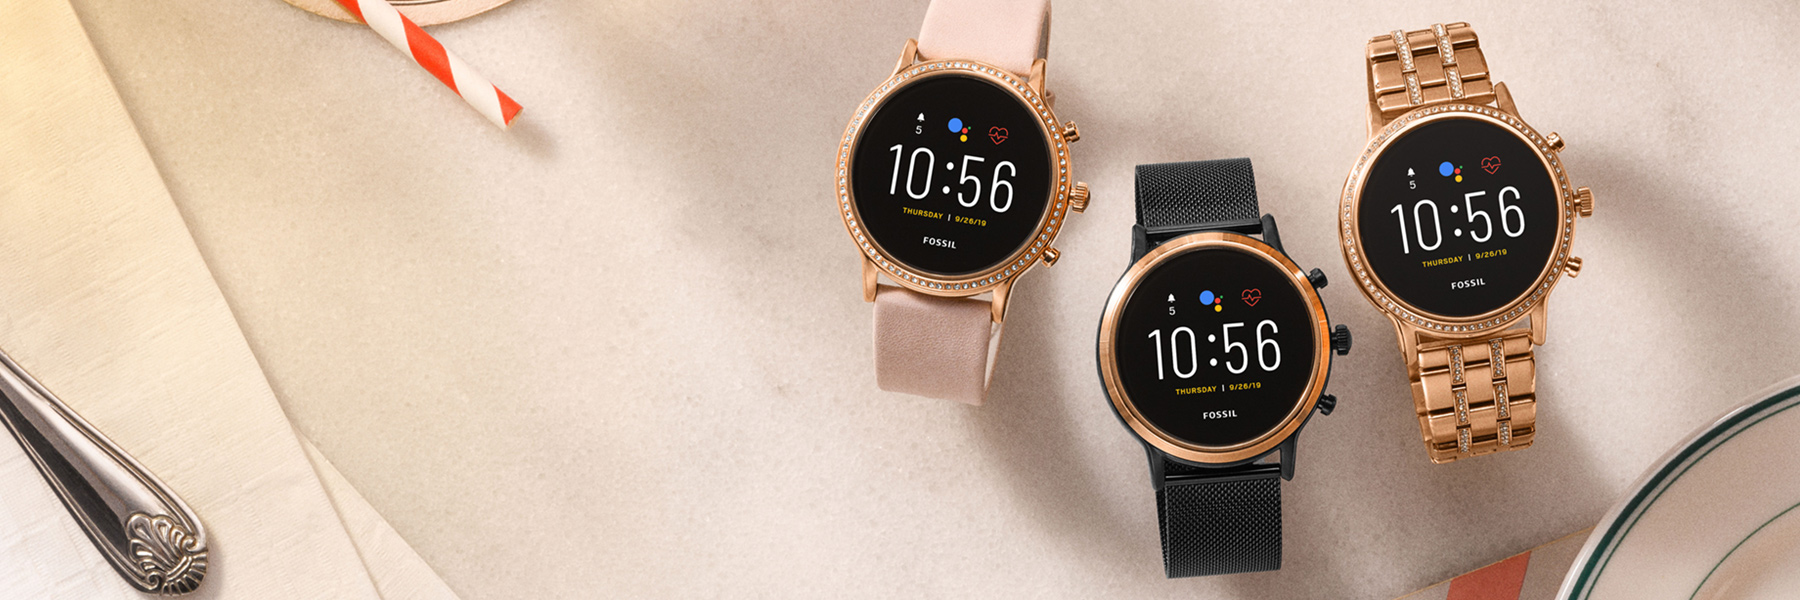 Snapdragon Wear 4100+, OLED screen, WearOS and SpO2 priced from 299 - Fossil Gen 6 smartwatch fully declassified